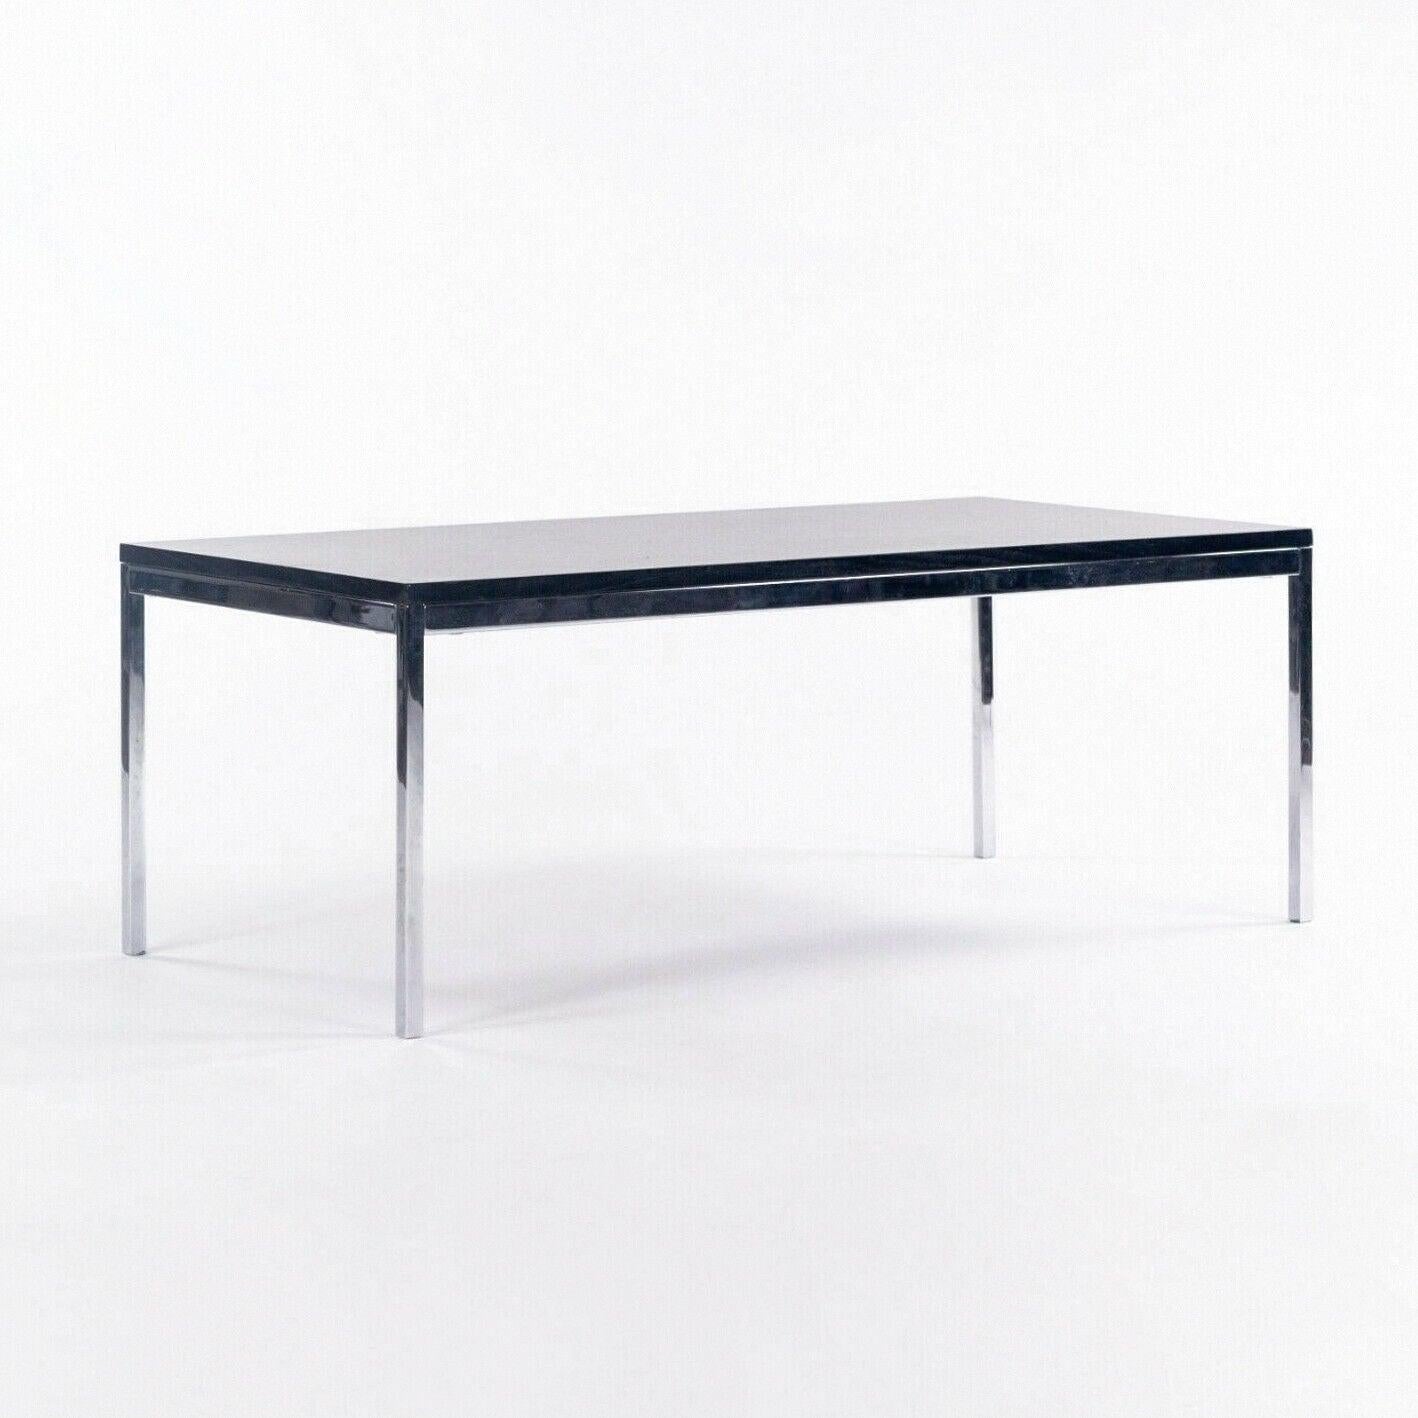 Listed for sale is a 2012 production Florence Knoll coffee table with chromed steel base and ebonized walnut top. This is a classic Florence Knoll design. The top is in excellent condition with only minimal wear. The chrome is also in beautiful